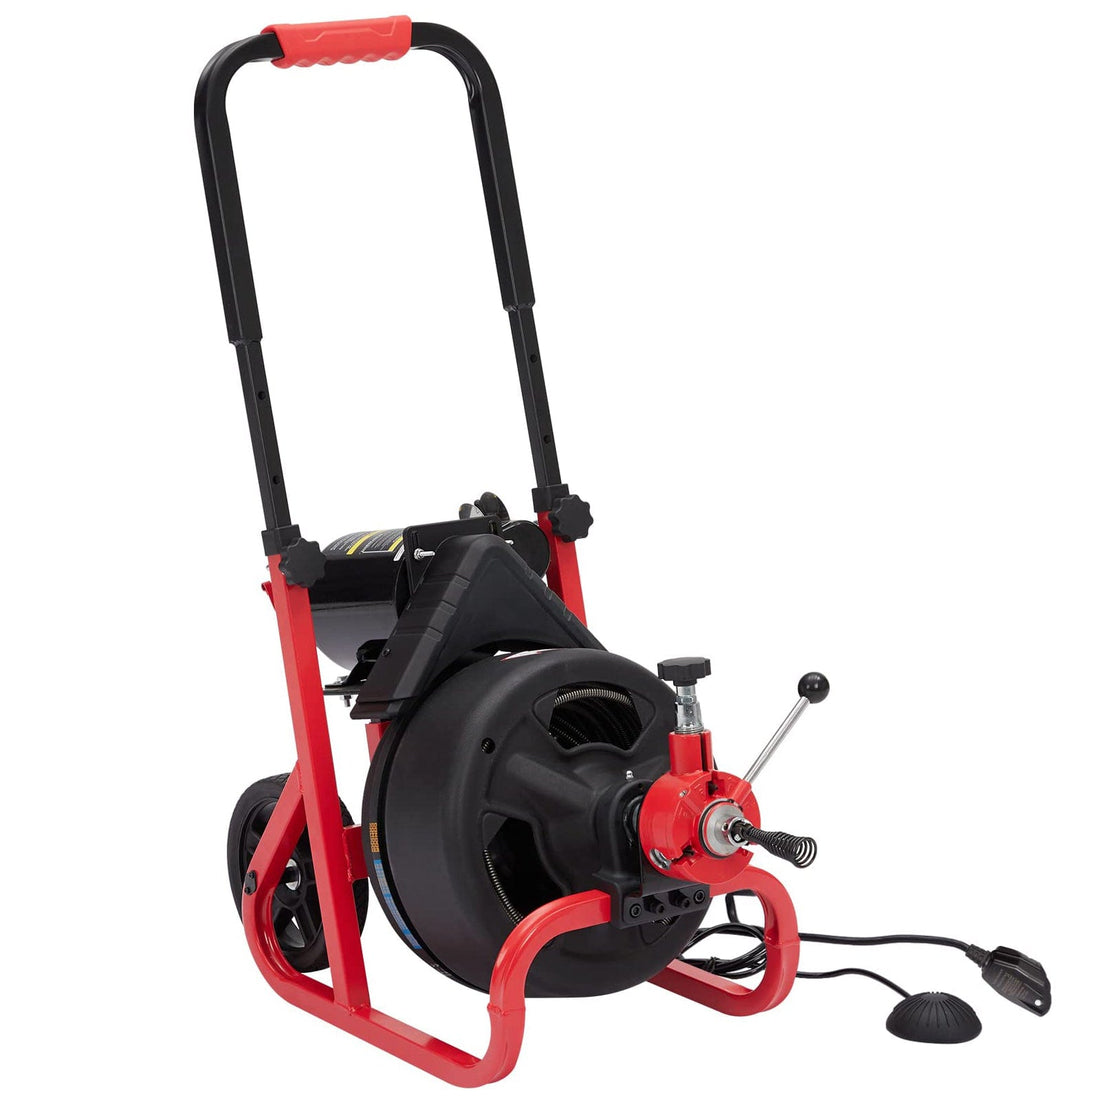 Professional 100Ft x 3/8Inch Drain Cleaner Machine, Auto-feed